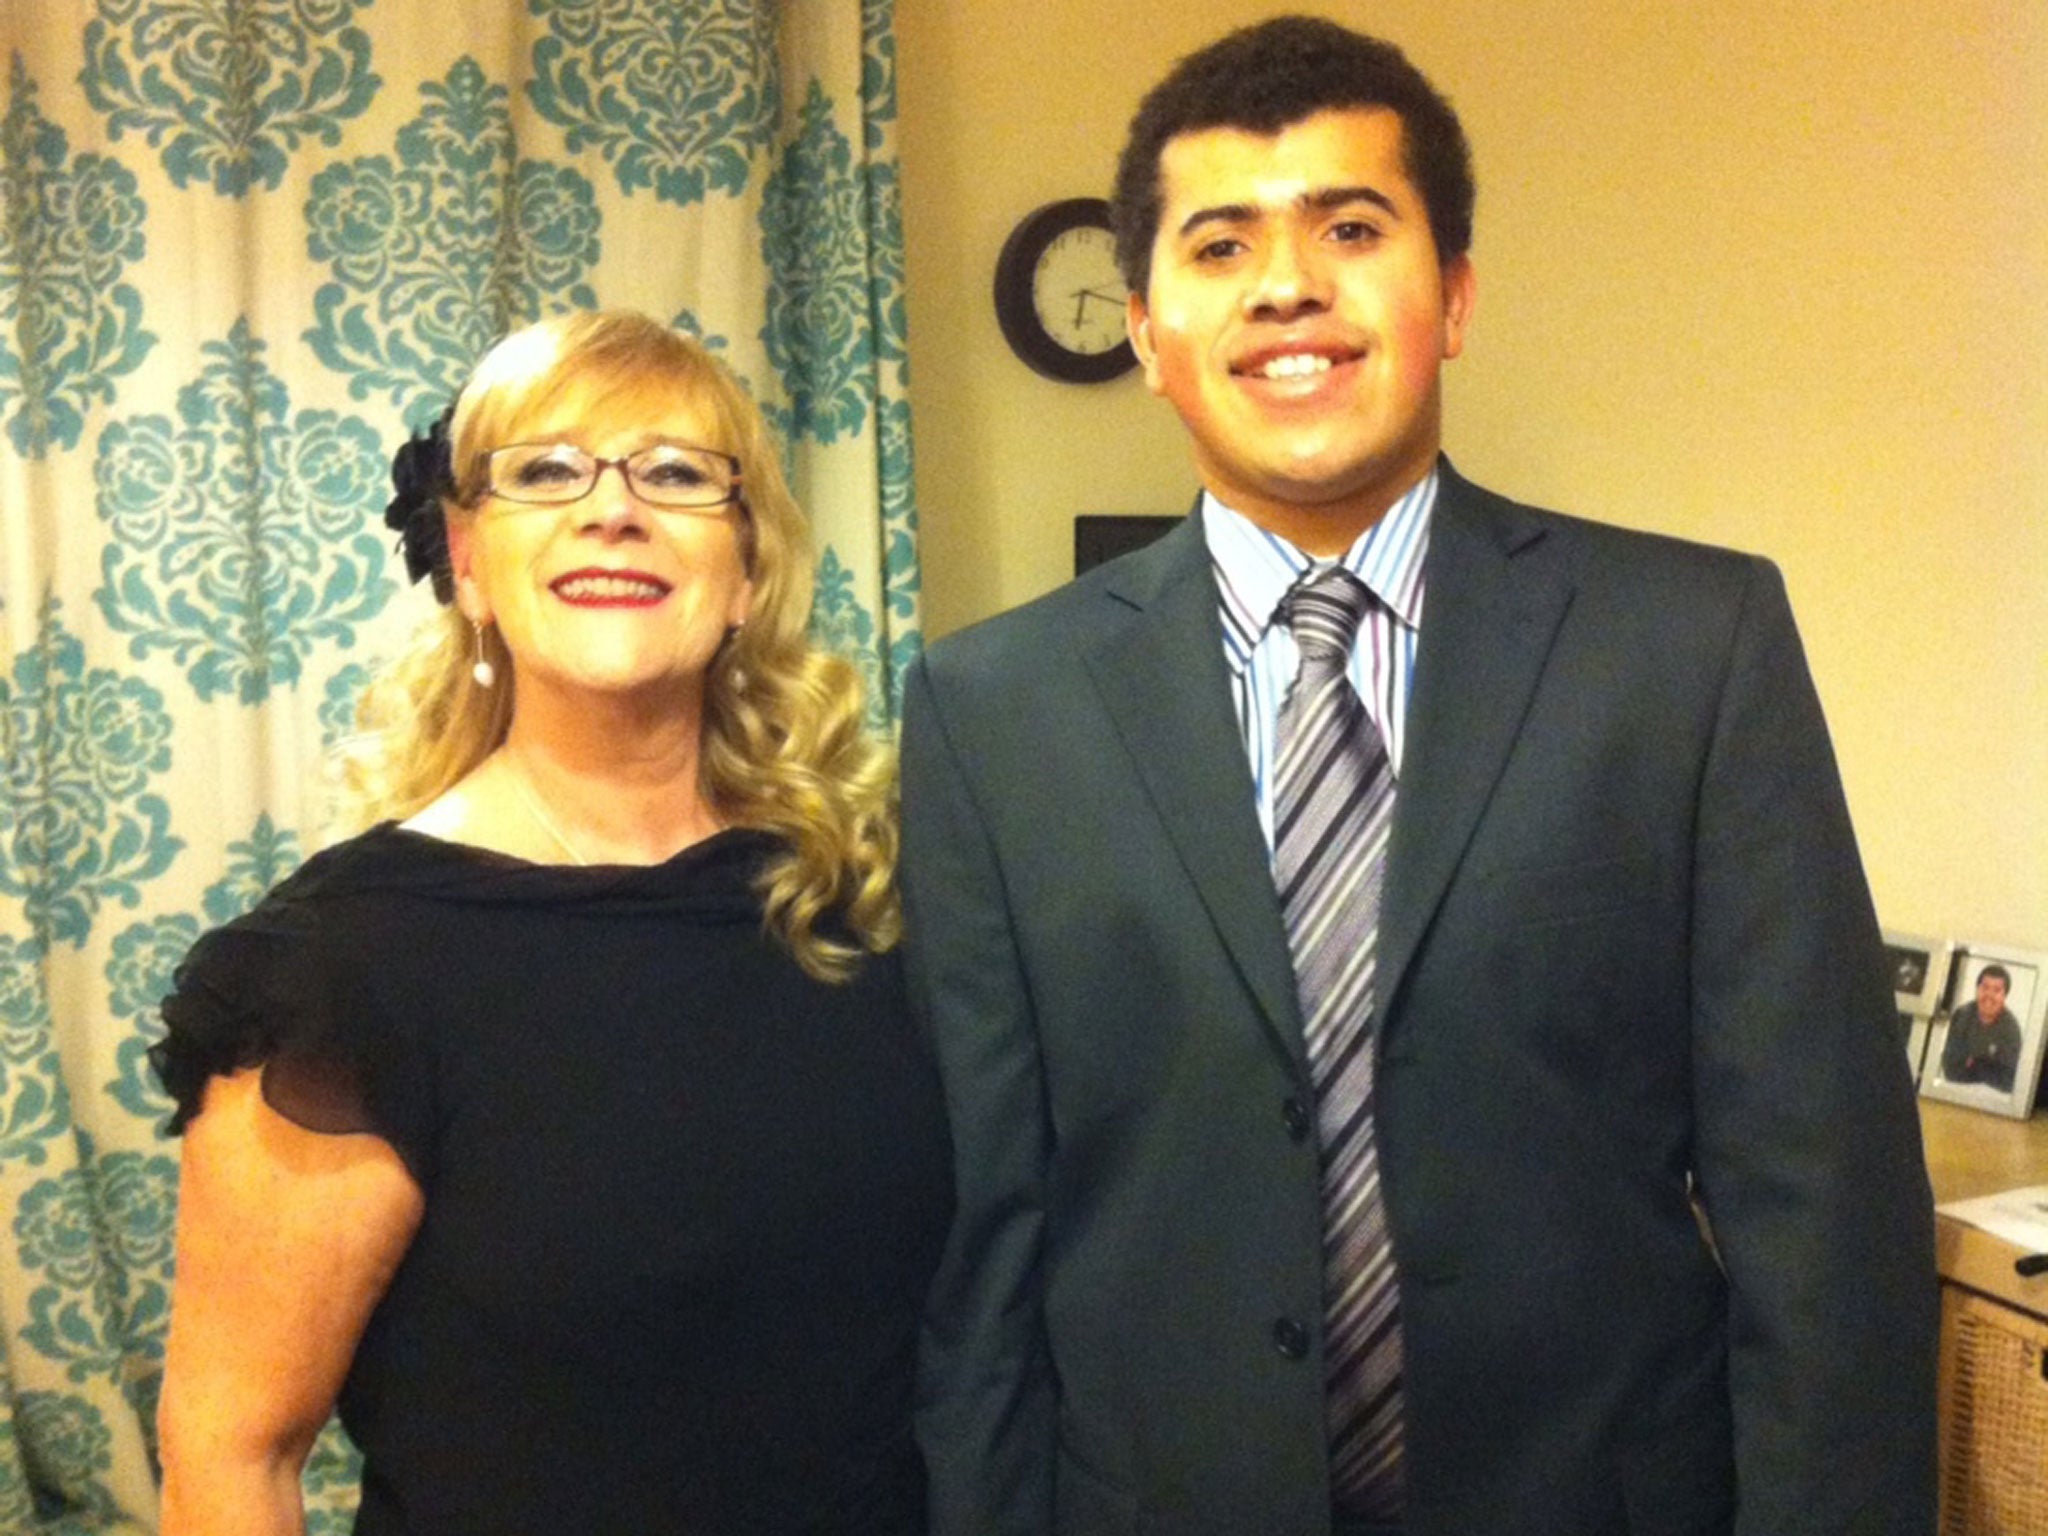 Sue Hopkinson with her 18-year-old son, Alex, who has autism